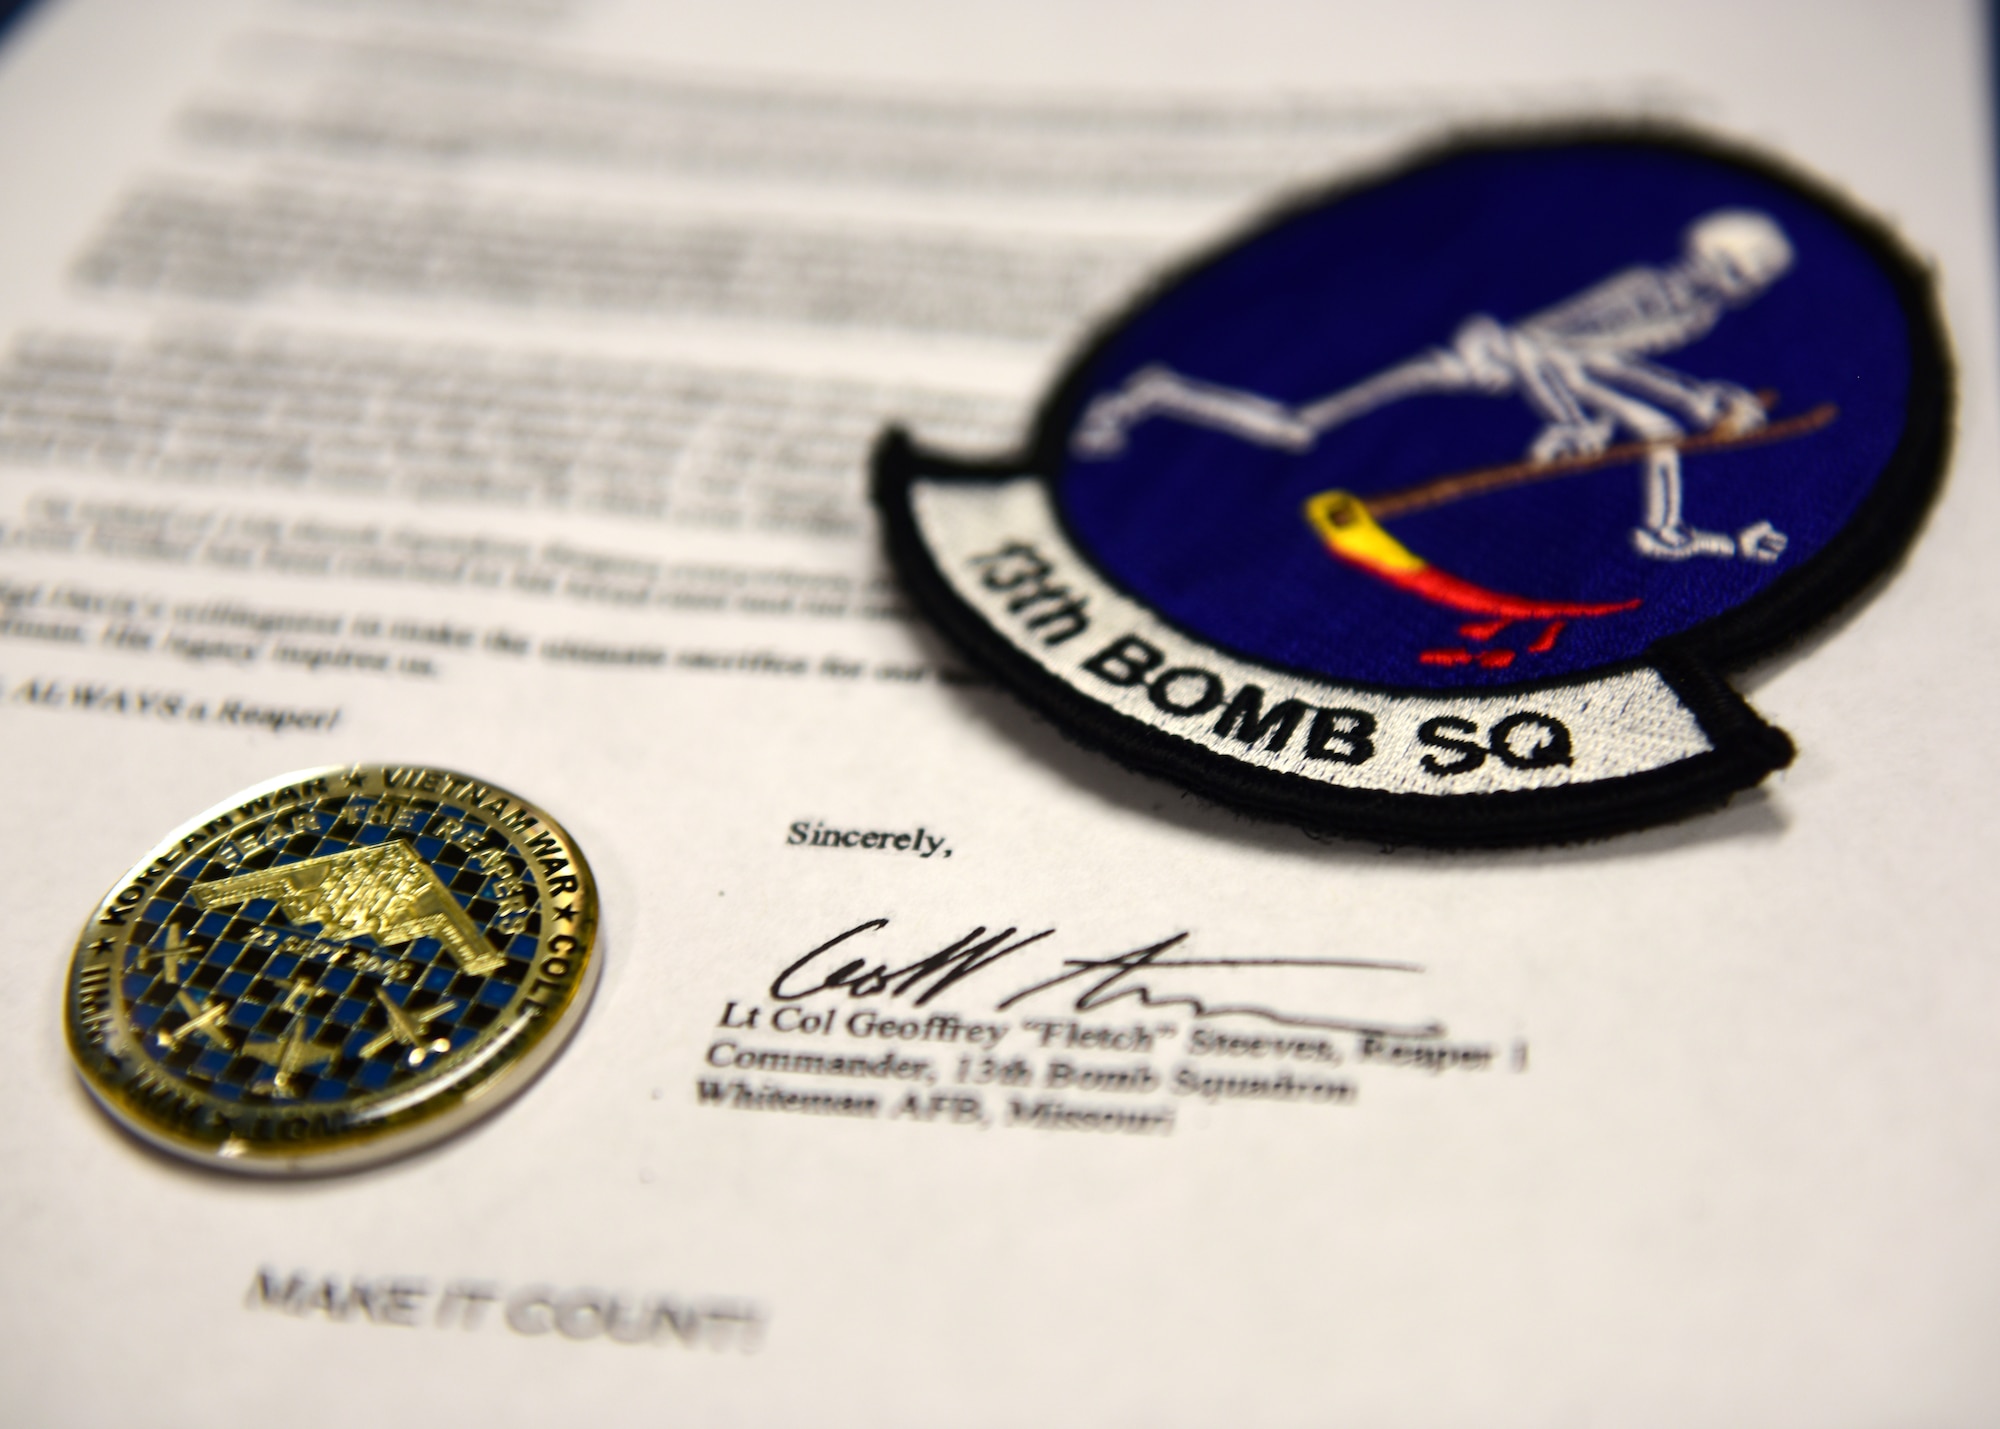 The current 13th Bomb Squadron patch and coin, along with a copy of the letter that was presented to the family of Army Air Force Staff Sgt. Roy Davis, a service member who was finally returned home after more than 70 years of being missing in action. Davis, a member of the 13th Bombardment Squadron of the 3rd Bombardment Group during World War II, received a proper burial with full military honors on June 23, 2018, in Ashby, Massachusetts.